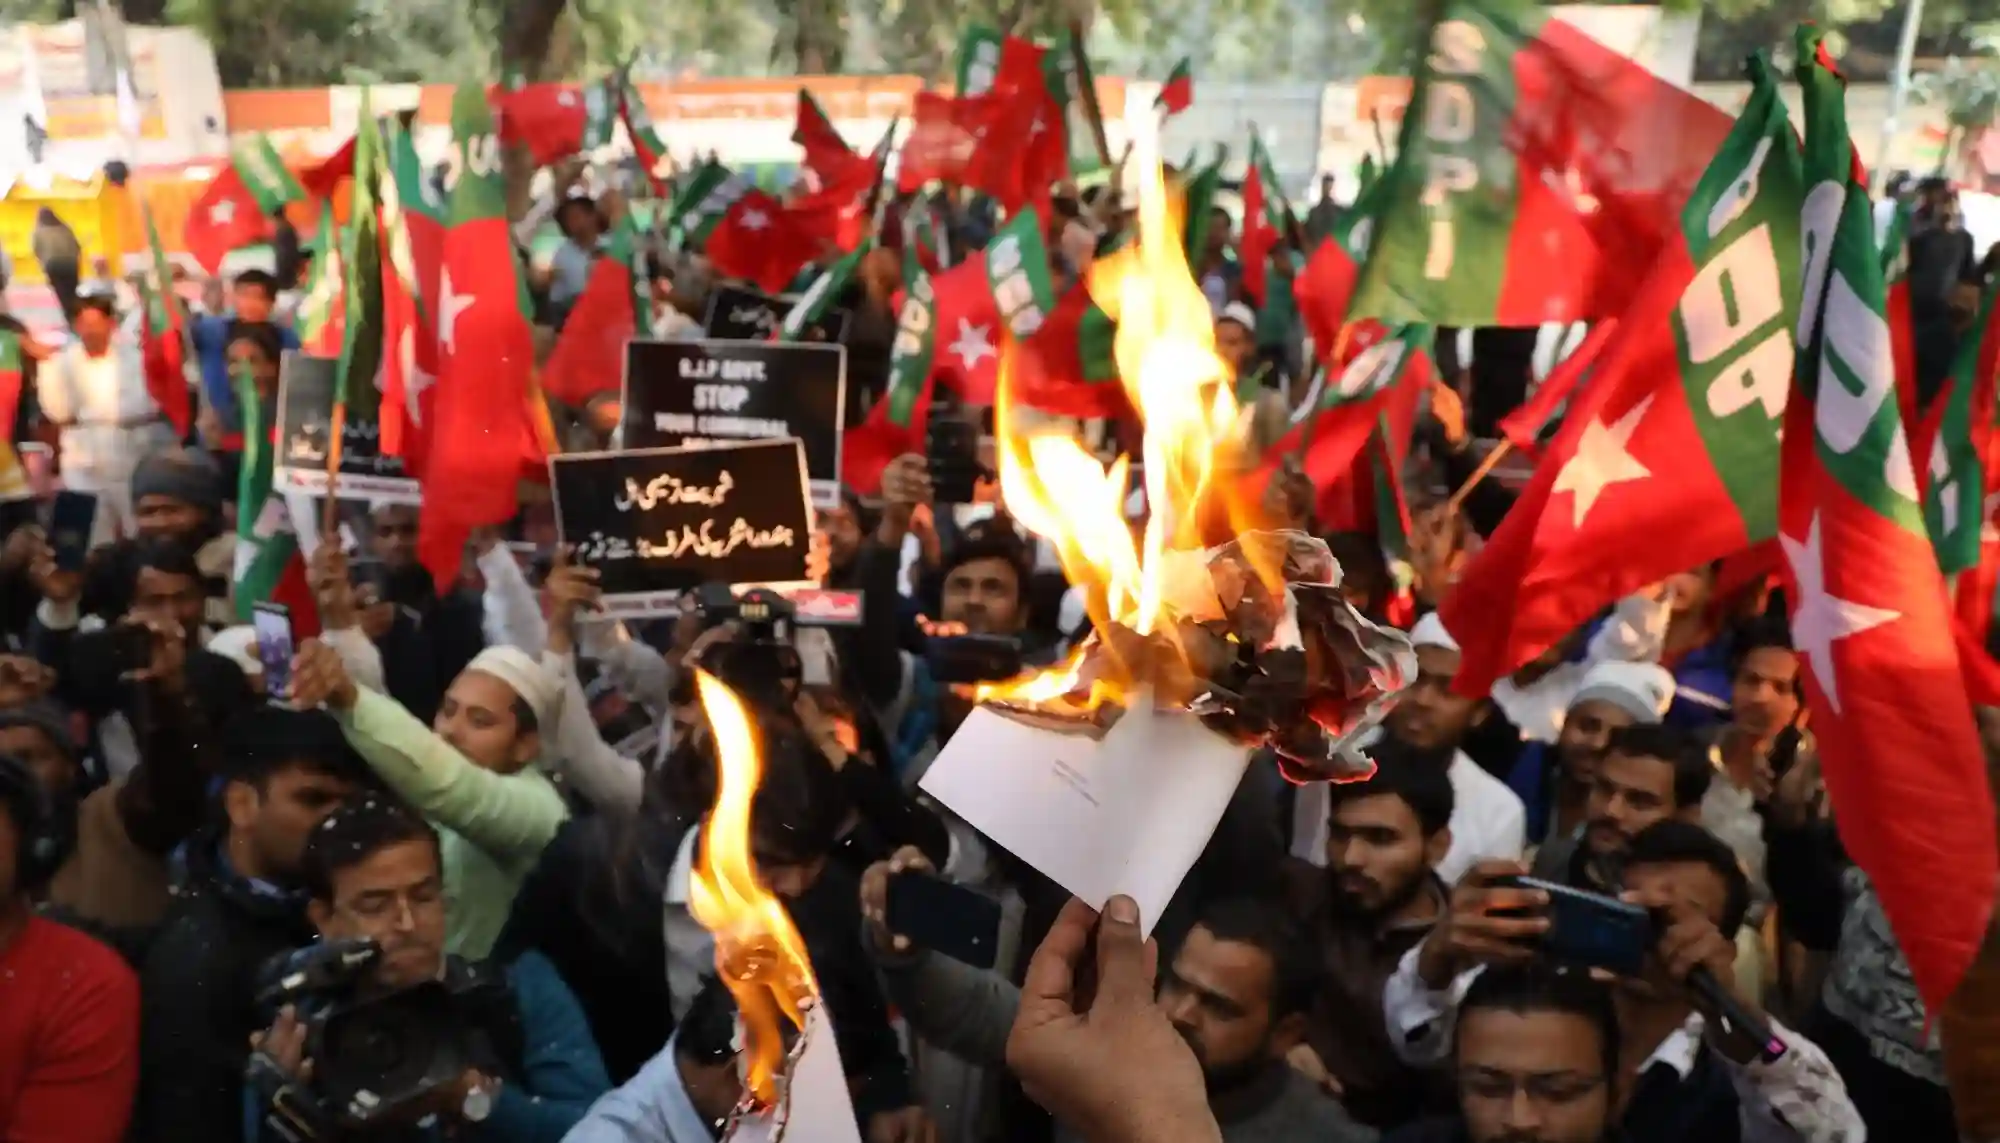 India bans PFI but the real battle is with political Islam